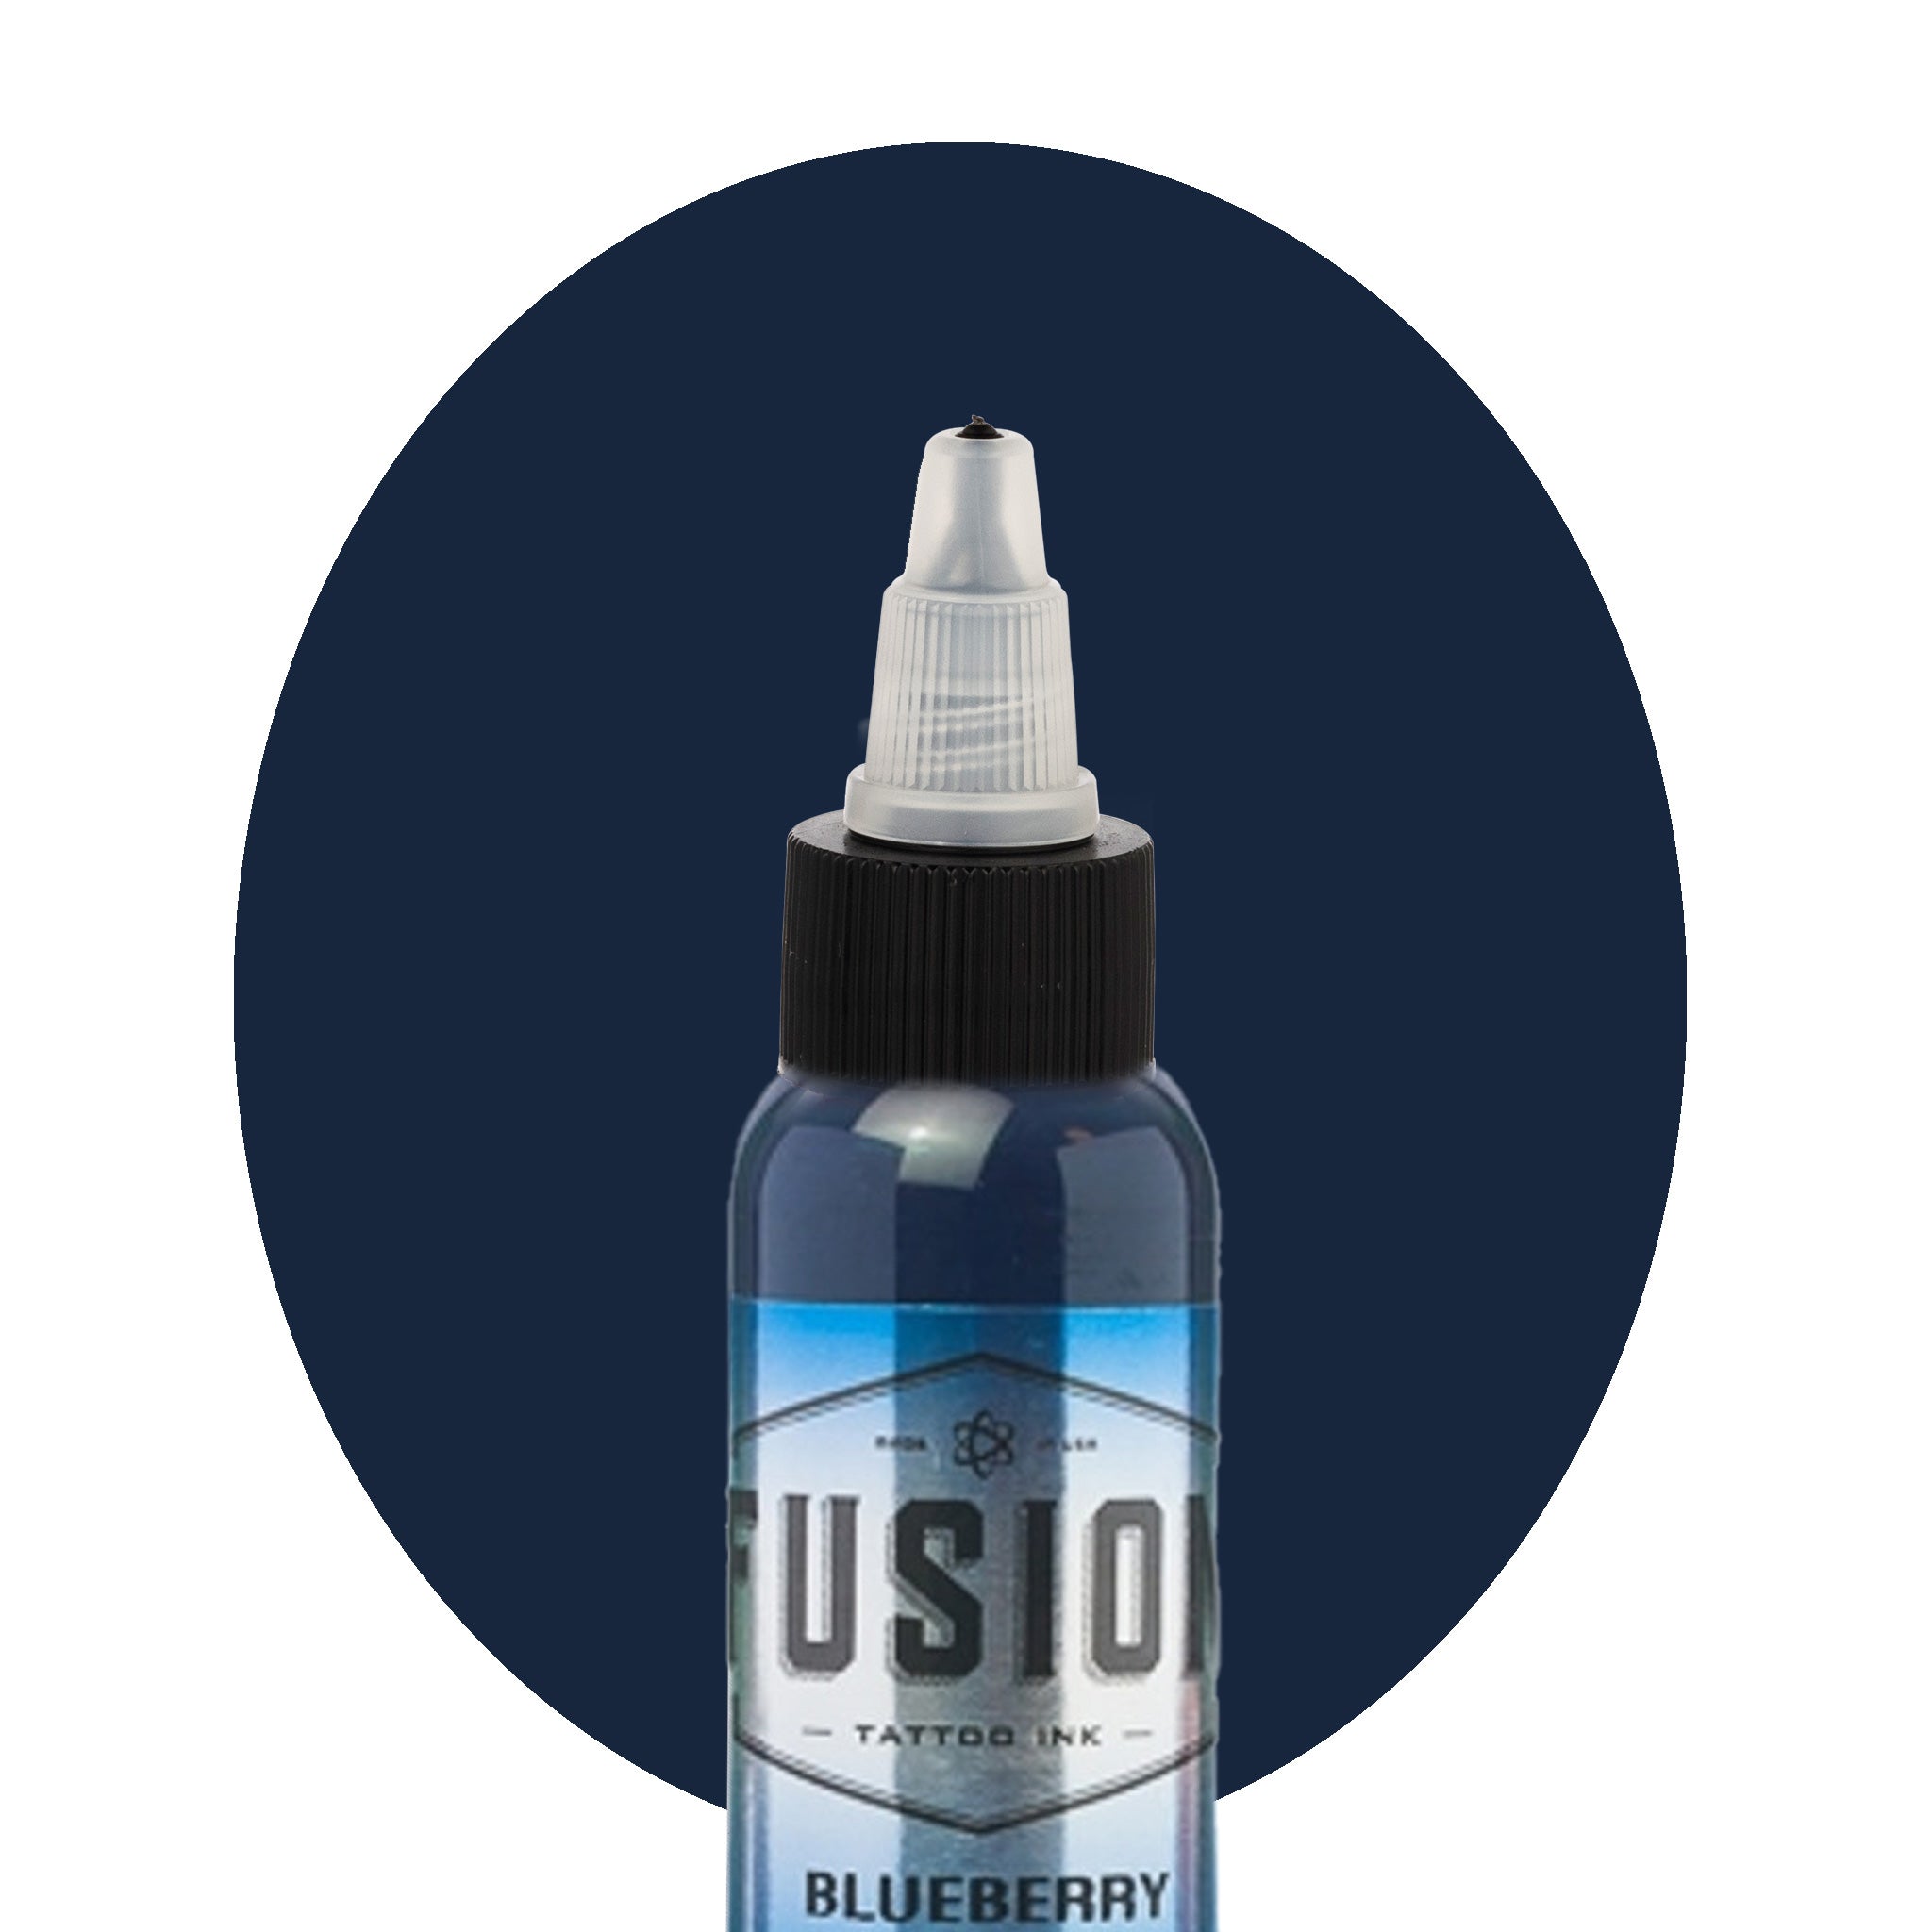 Fusion Blueberry Tattoo Ink 1 oz.